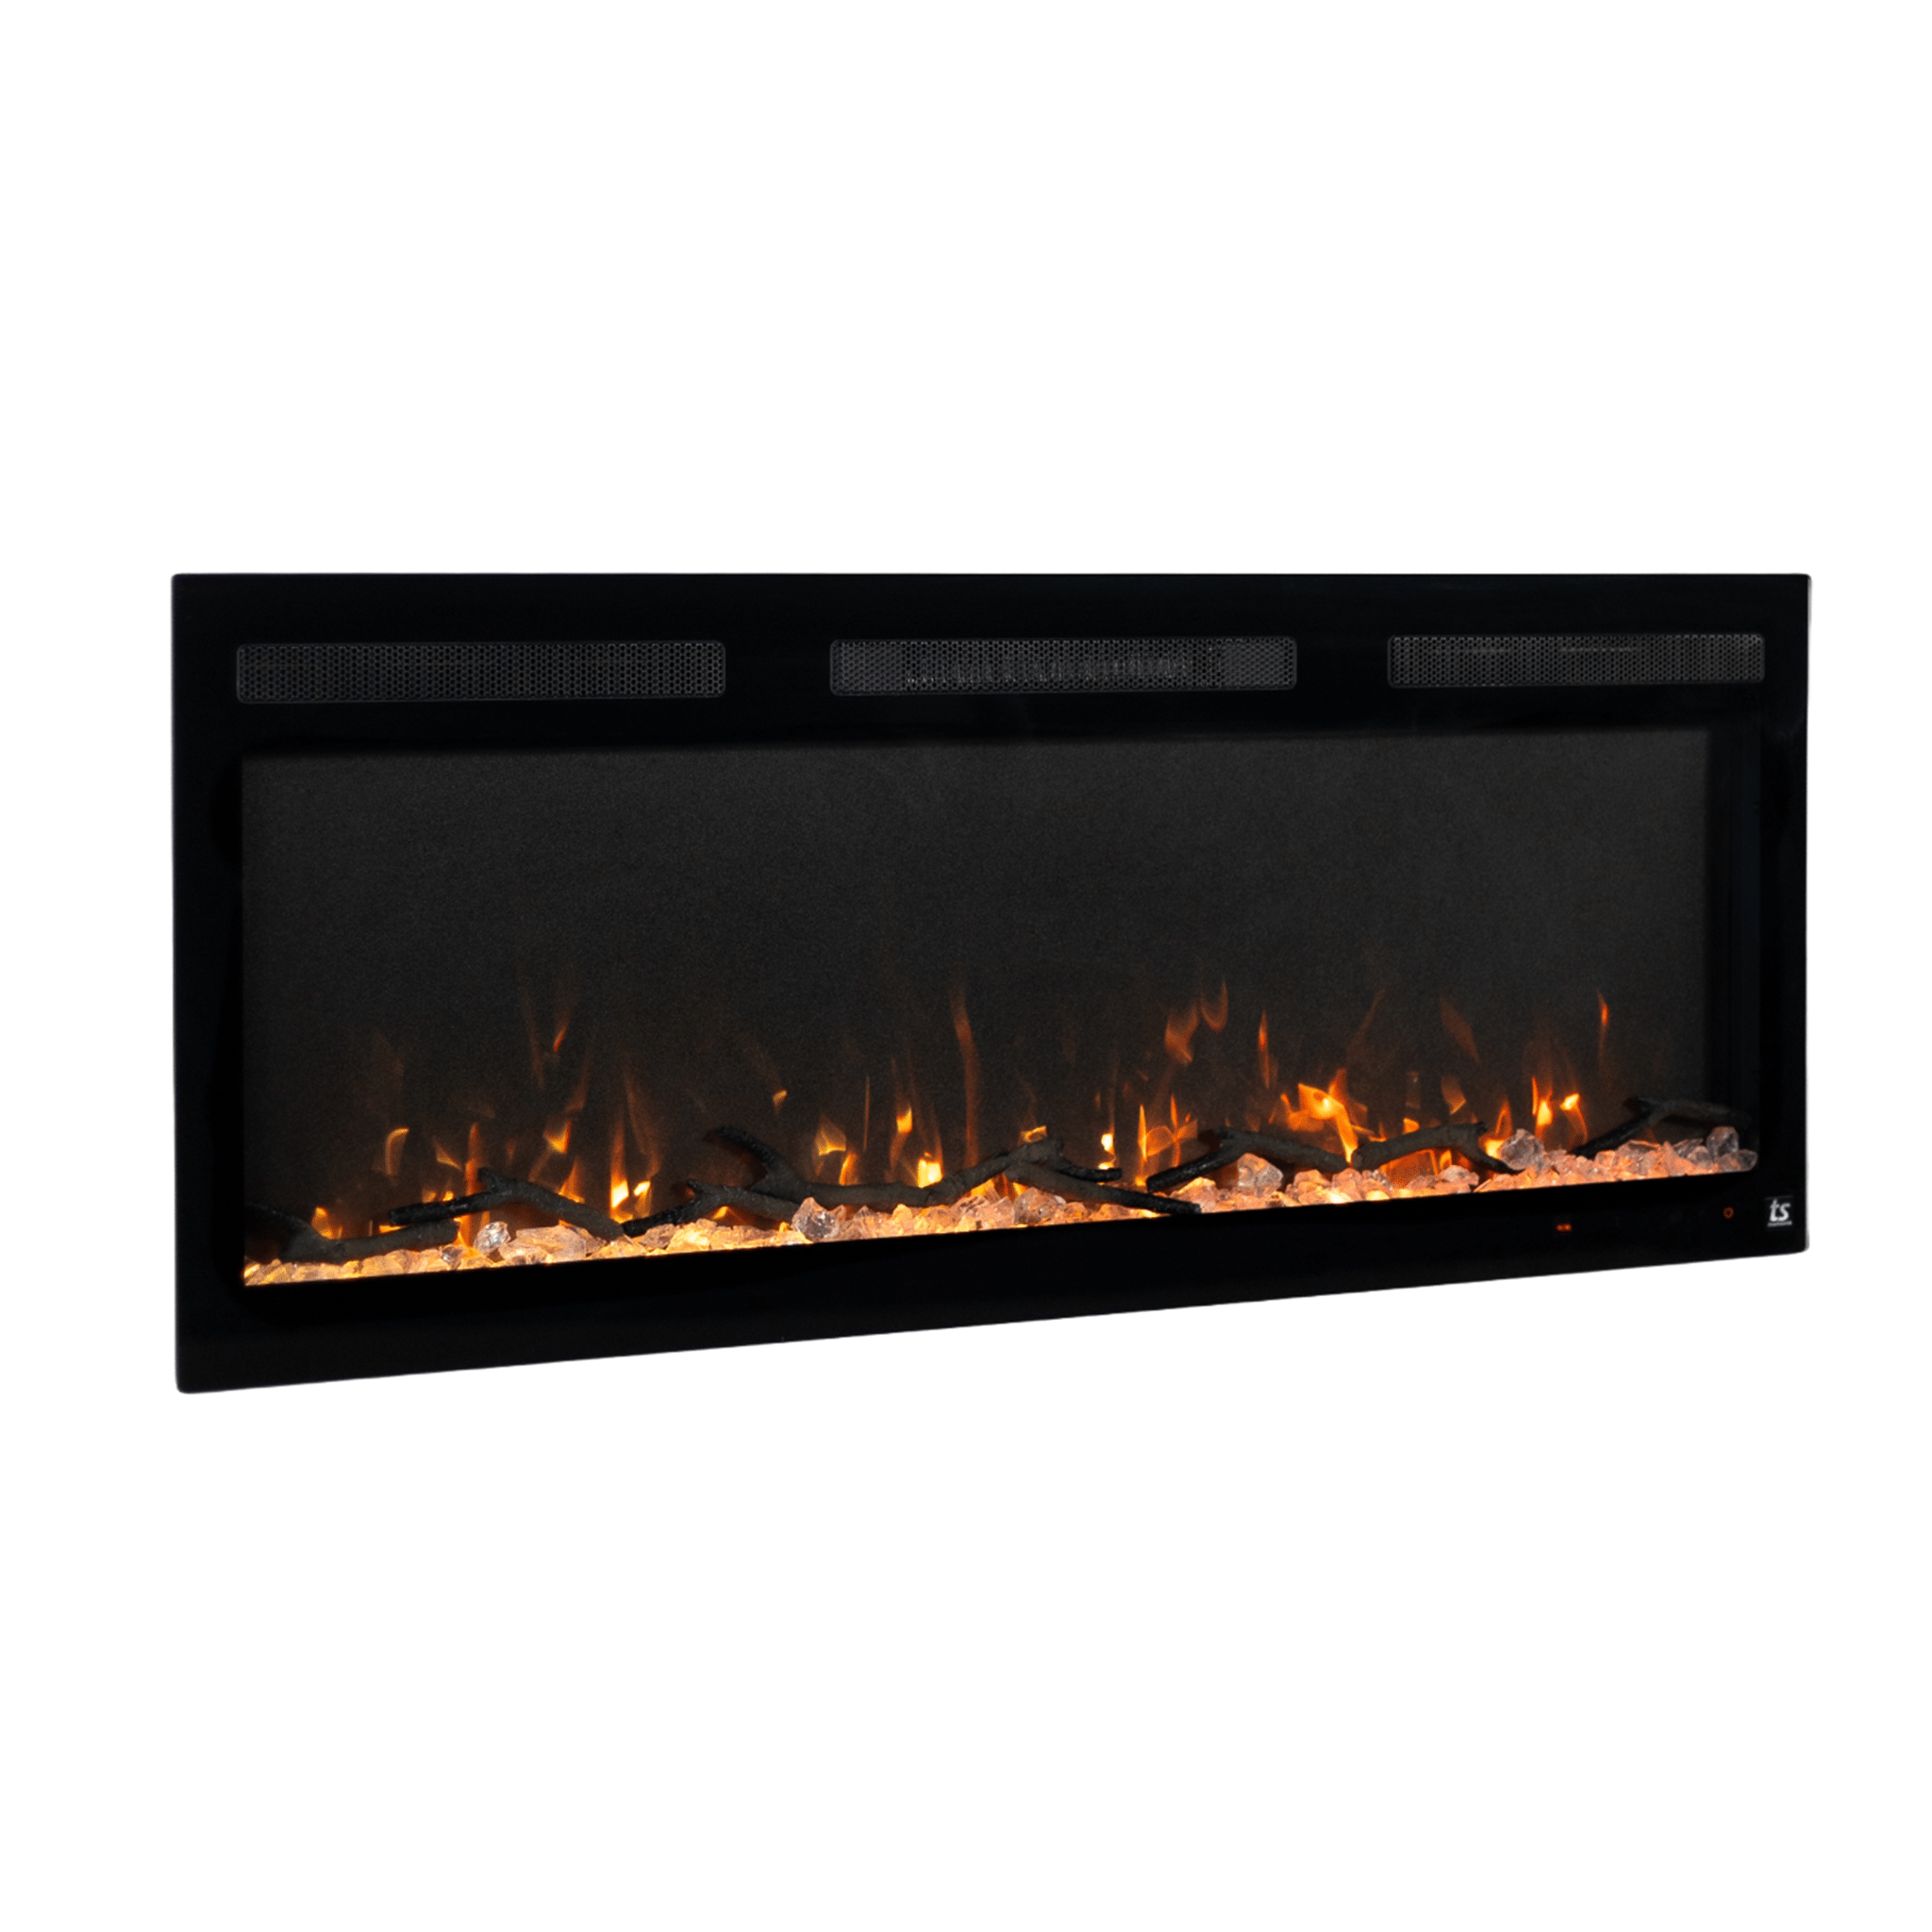 The Sideline Fury 50 Inch Recessed Smart Electric Fireplace 80054 angled